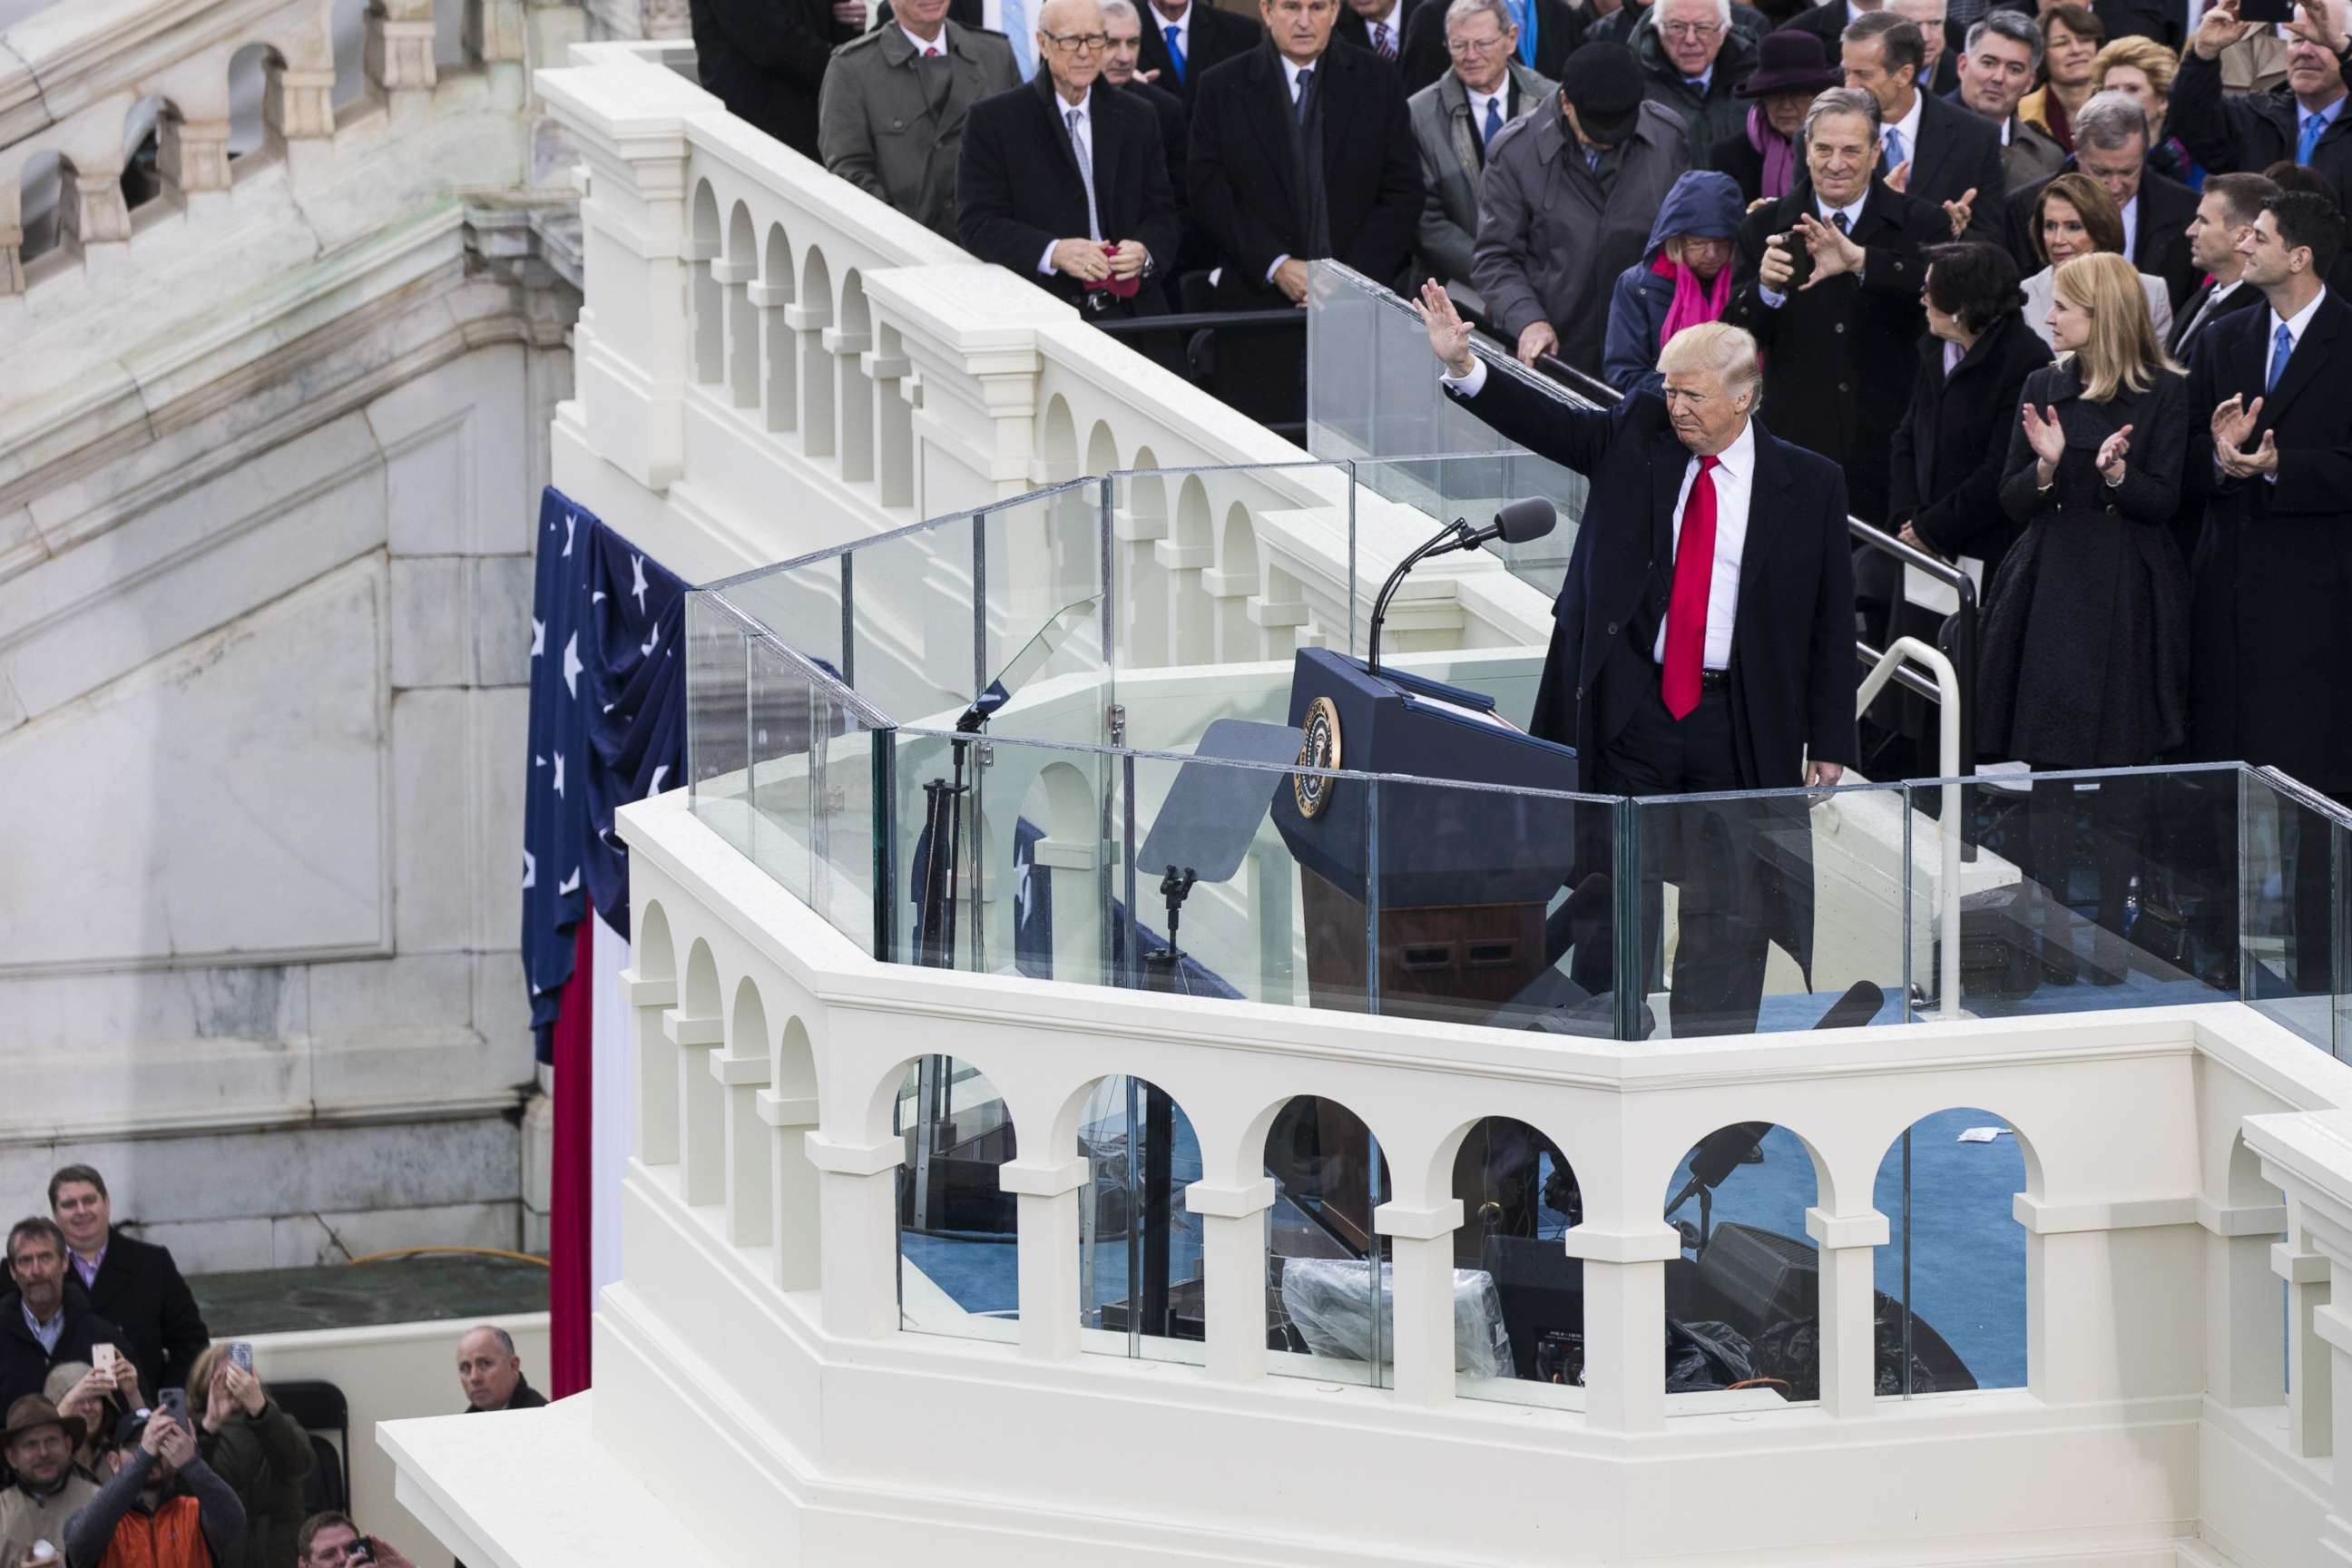 PHOTO: President Donald Trump waves to the crowds during the 58th U.S. Presidential Inauguration after he was sworn in as the 45th President of the United States of America, Jan. 20, 2017.